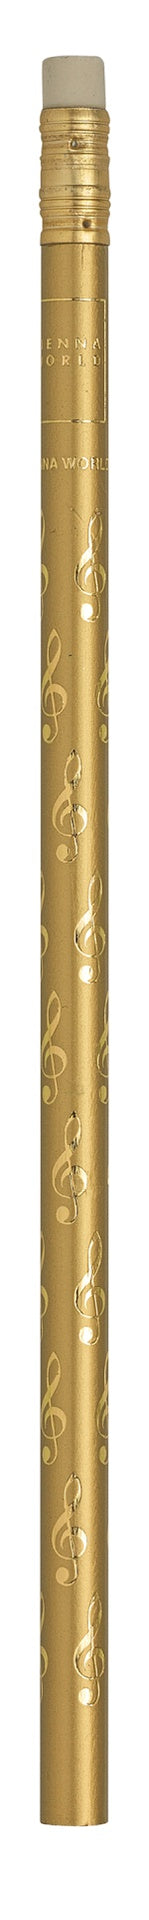 Pencil Blue with Gold Treble Clefs